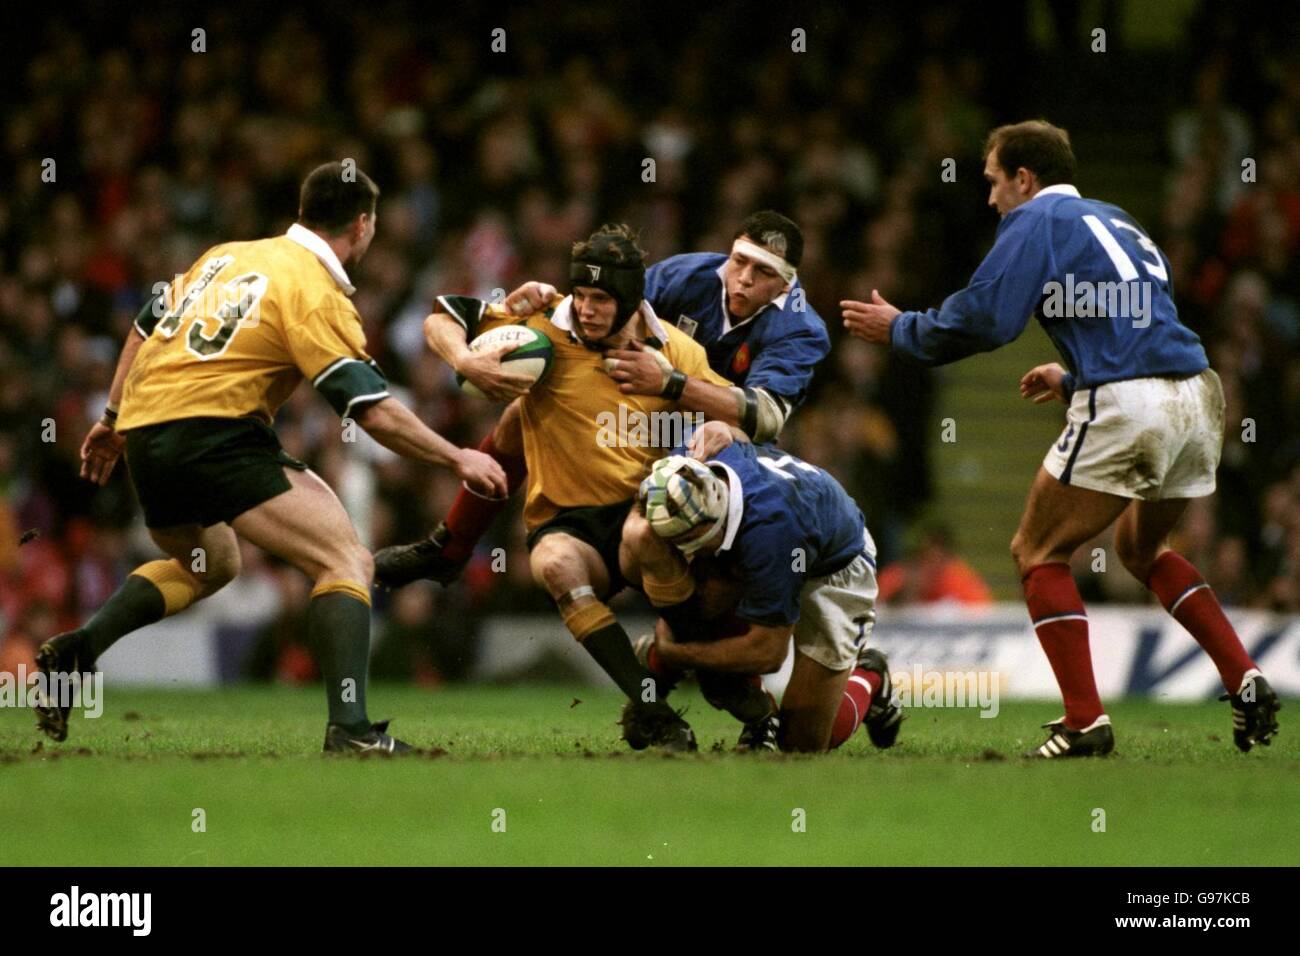 Australia's Stephen Larkham (second left) is brought down by France's Olivier Magne (second right, bottom) and Abdelatif Benazzi (second right, top) Stock Photo